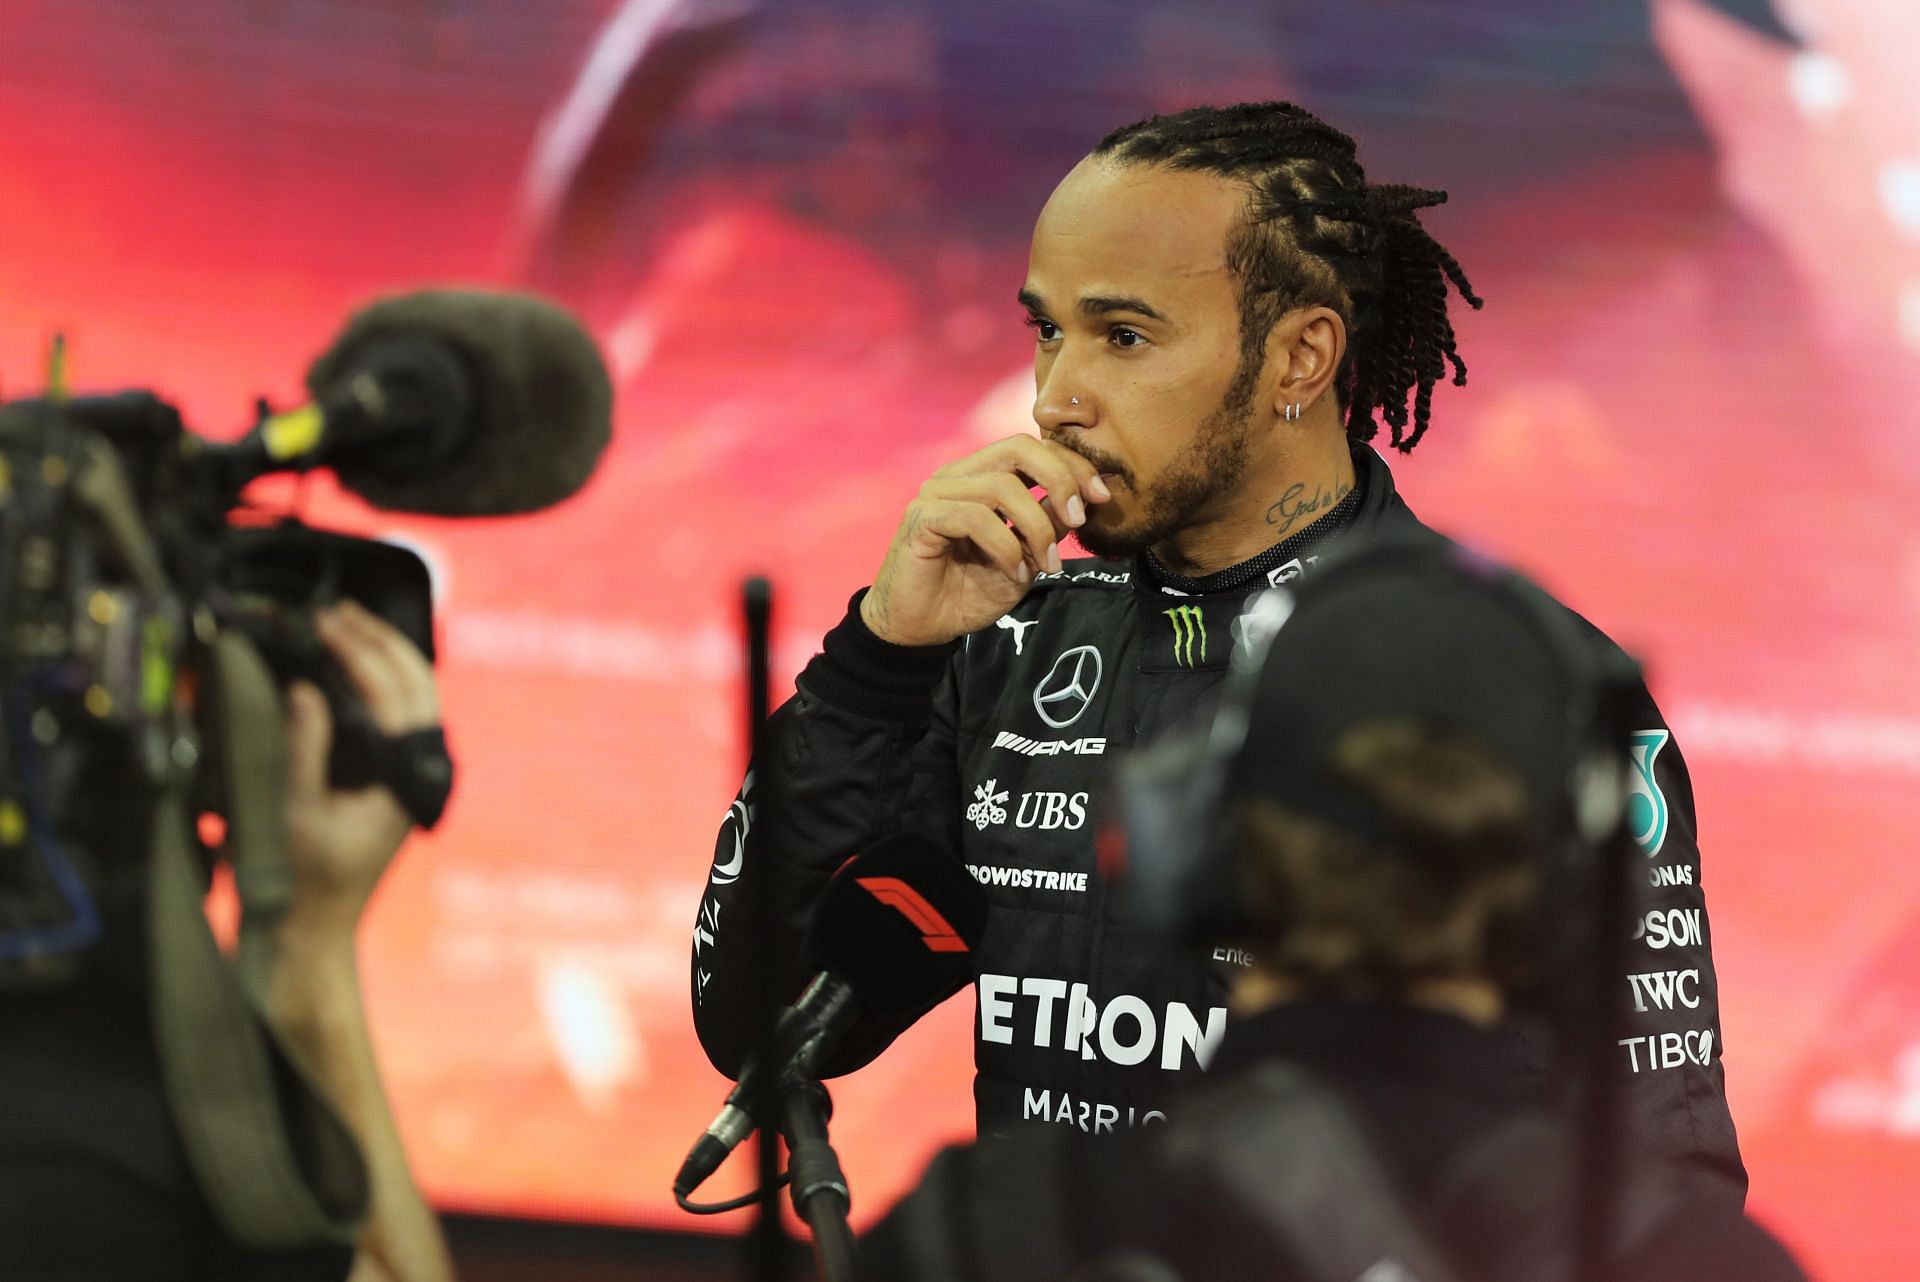 Have we seen the last of Lewis Hamilton title wins in 2020?